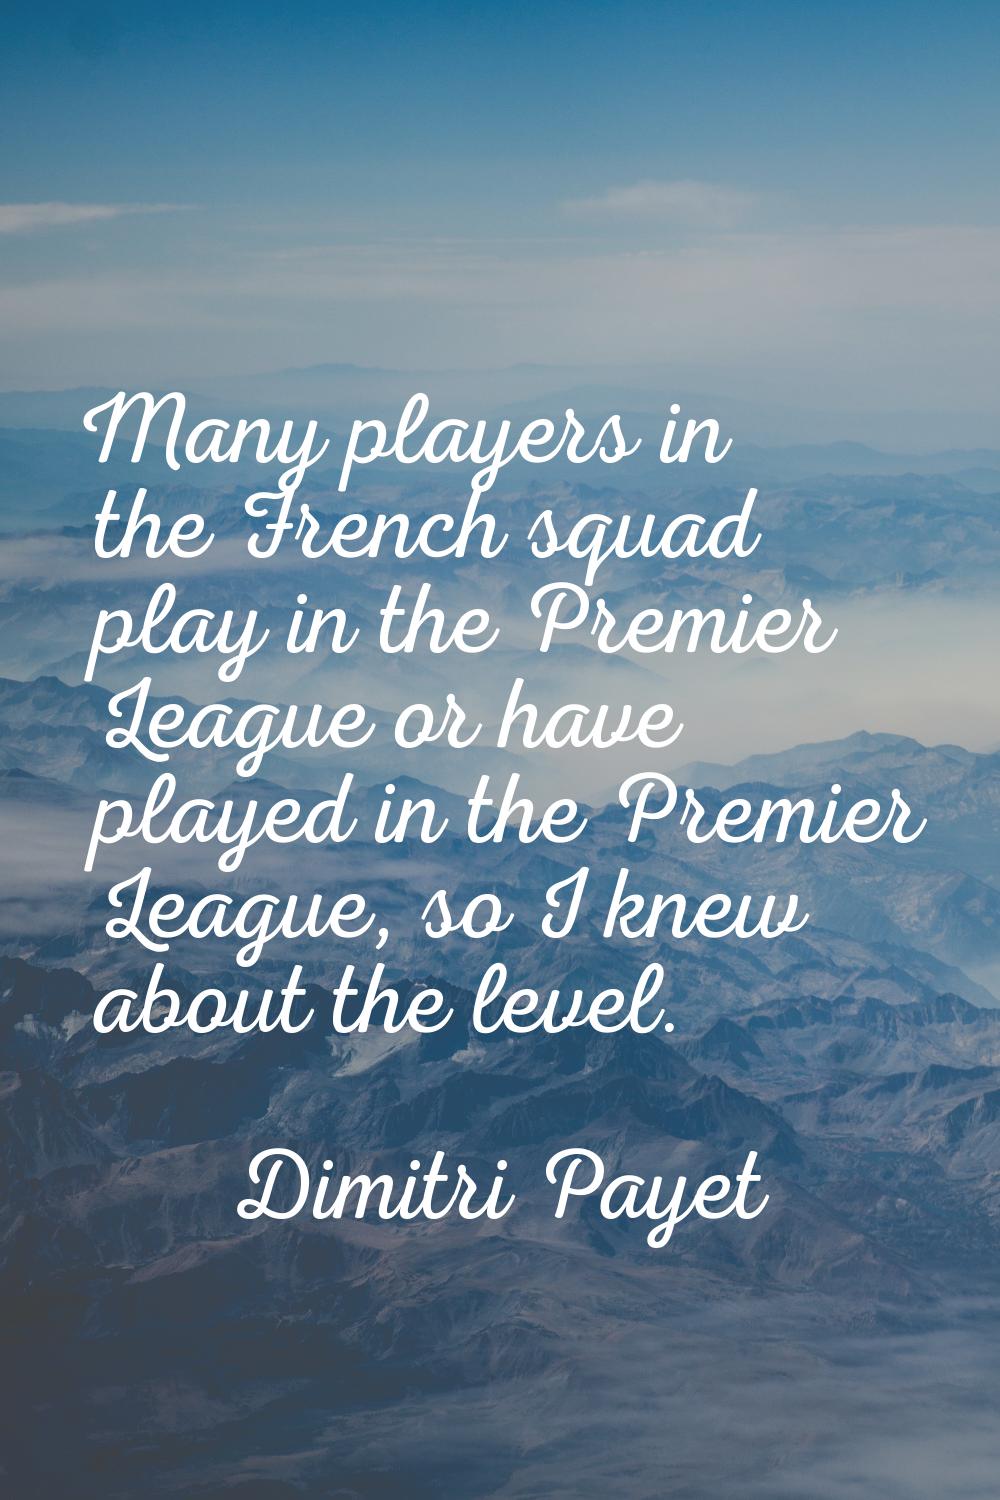 Many players in the French squad play in the Premier League or have played in the Premier League, s